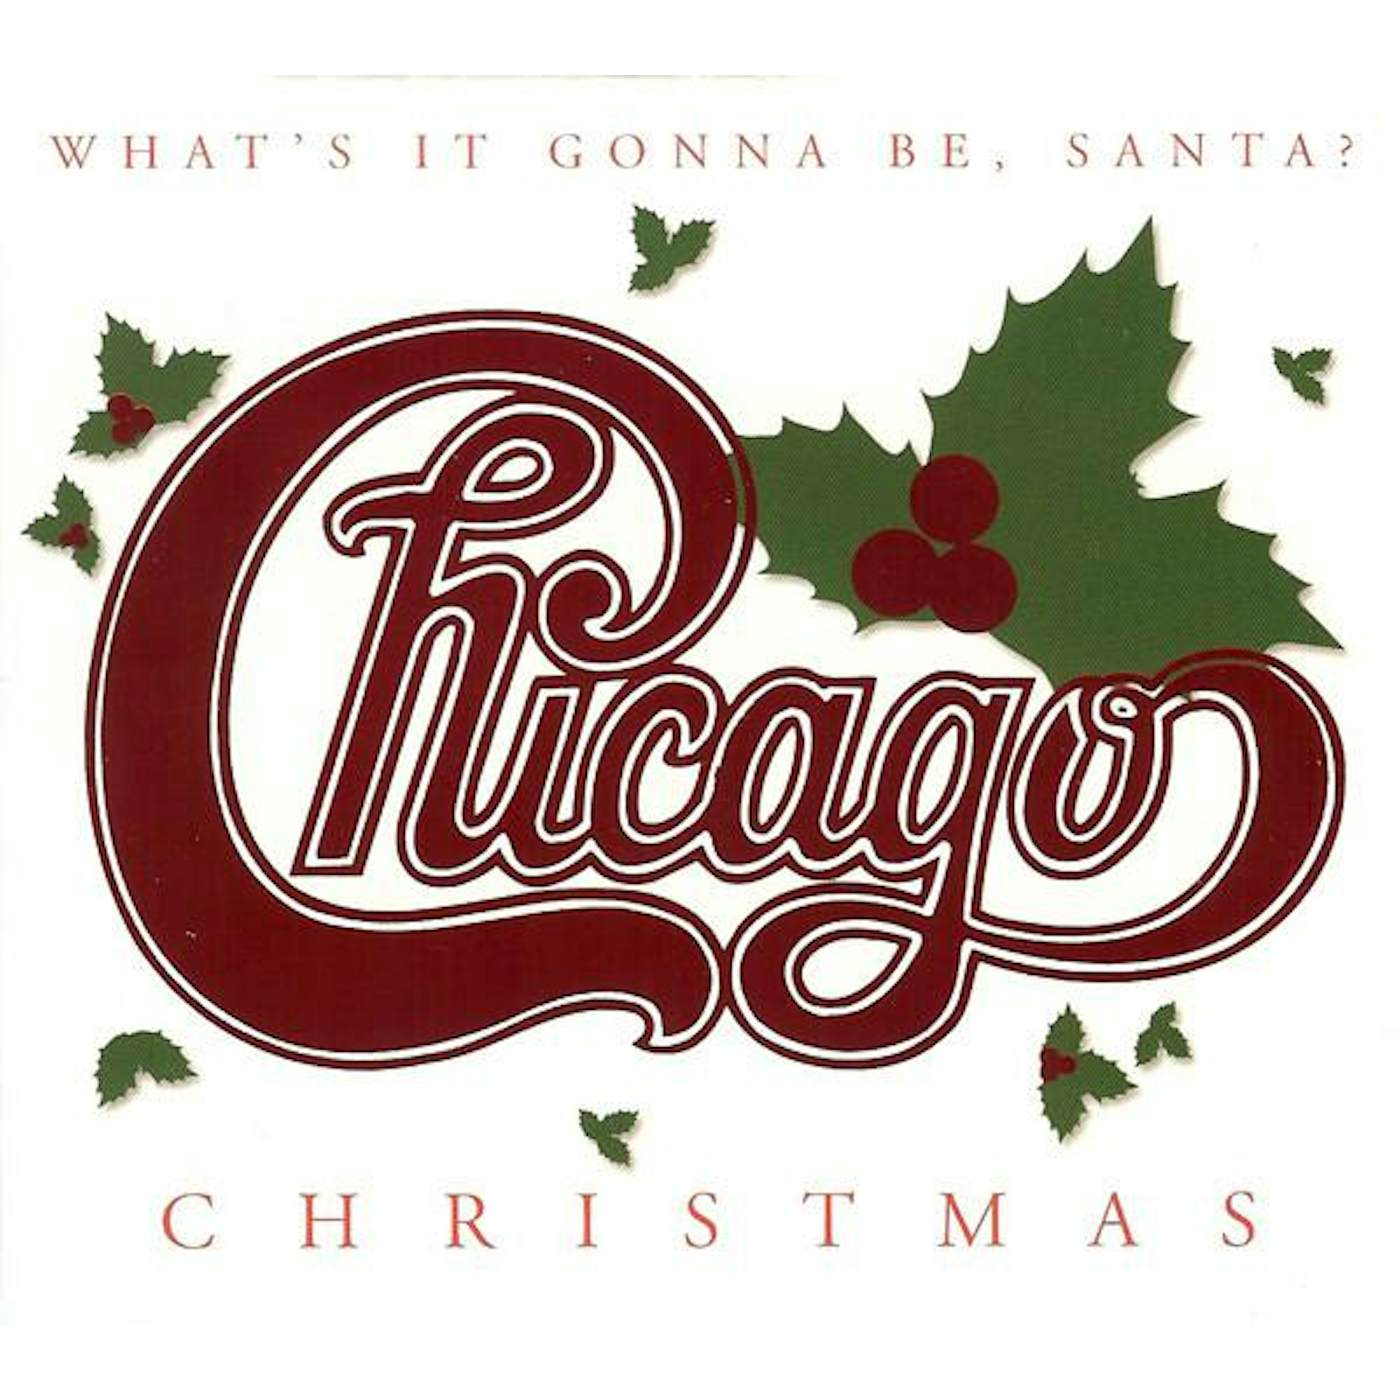 Chicago CHRISTMAS: WHAT'S IT GONNA BE SANTA CD